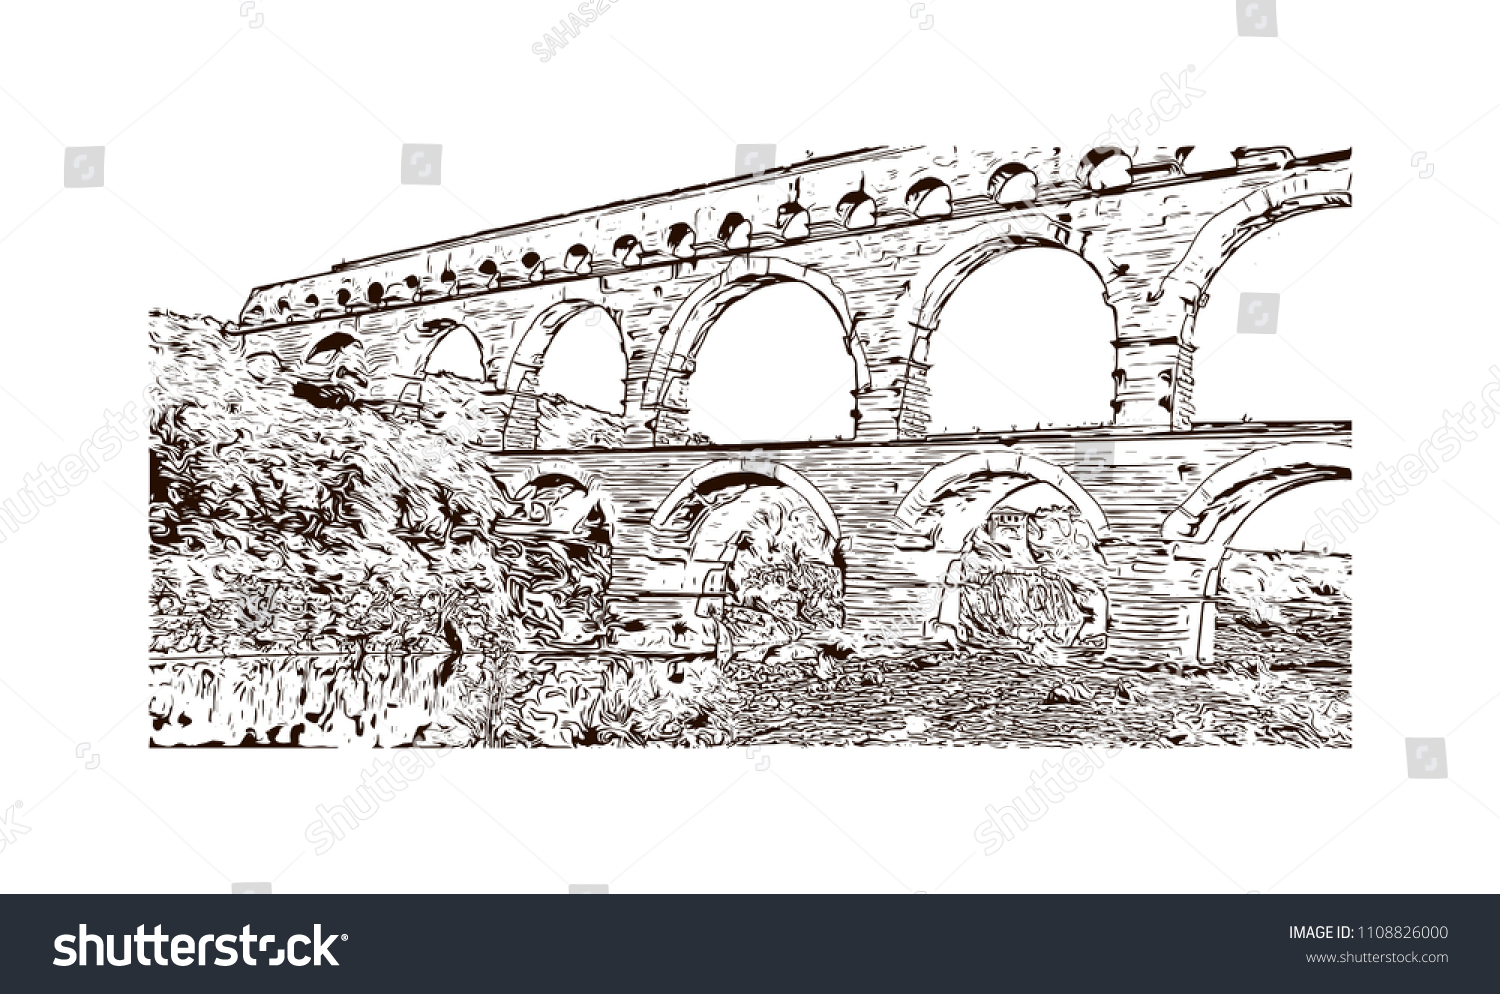 SVG of The Pont du Gard is an ancient Roman aqueduct that crosses the Gardon River near the town of Vers-Pont-du-Gard in southern France. Hand drawn sketch illustration in vector. svg